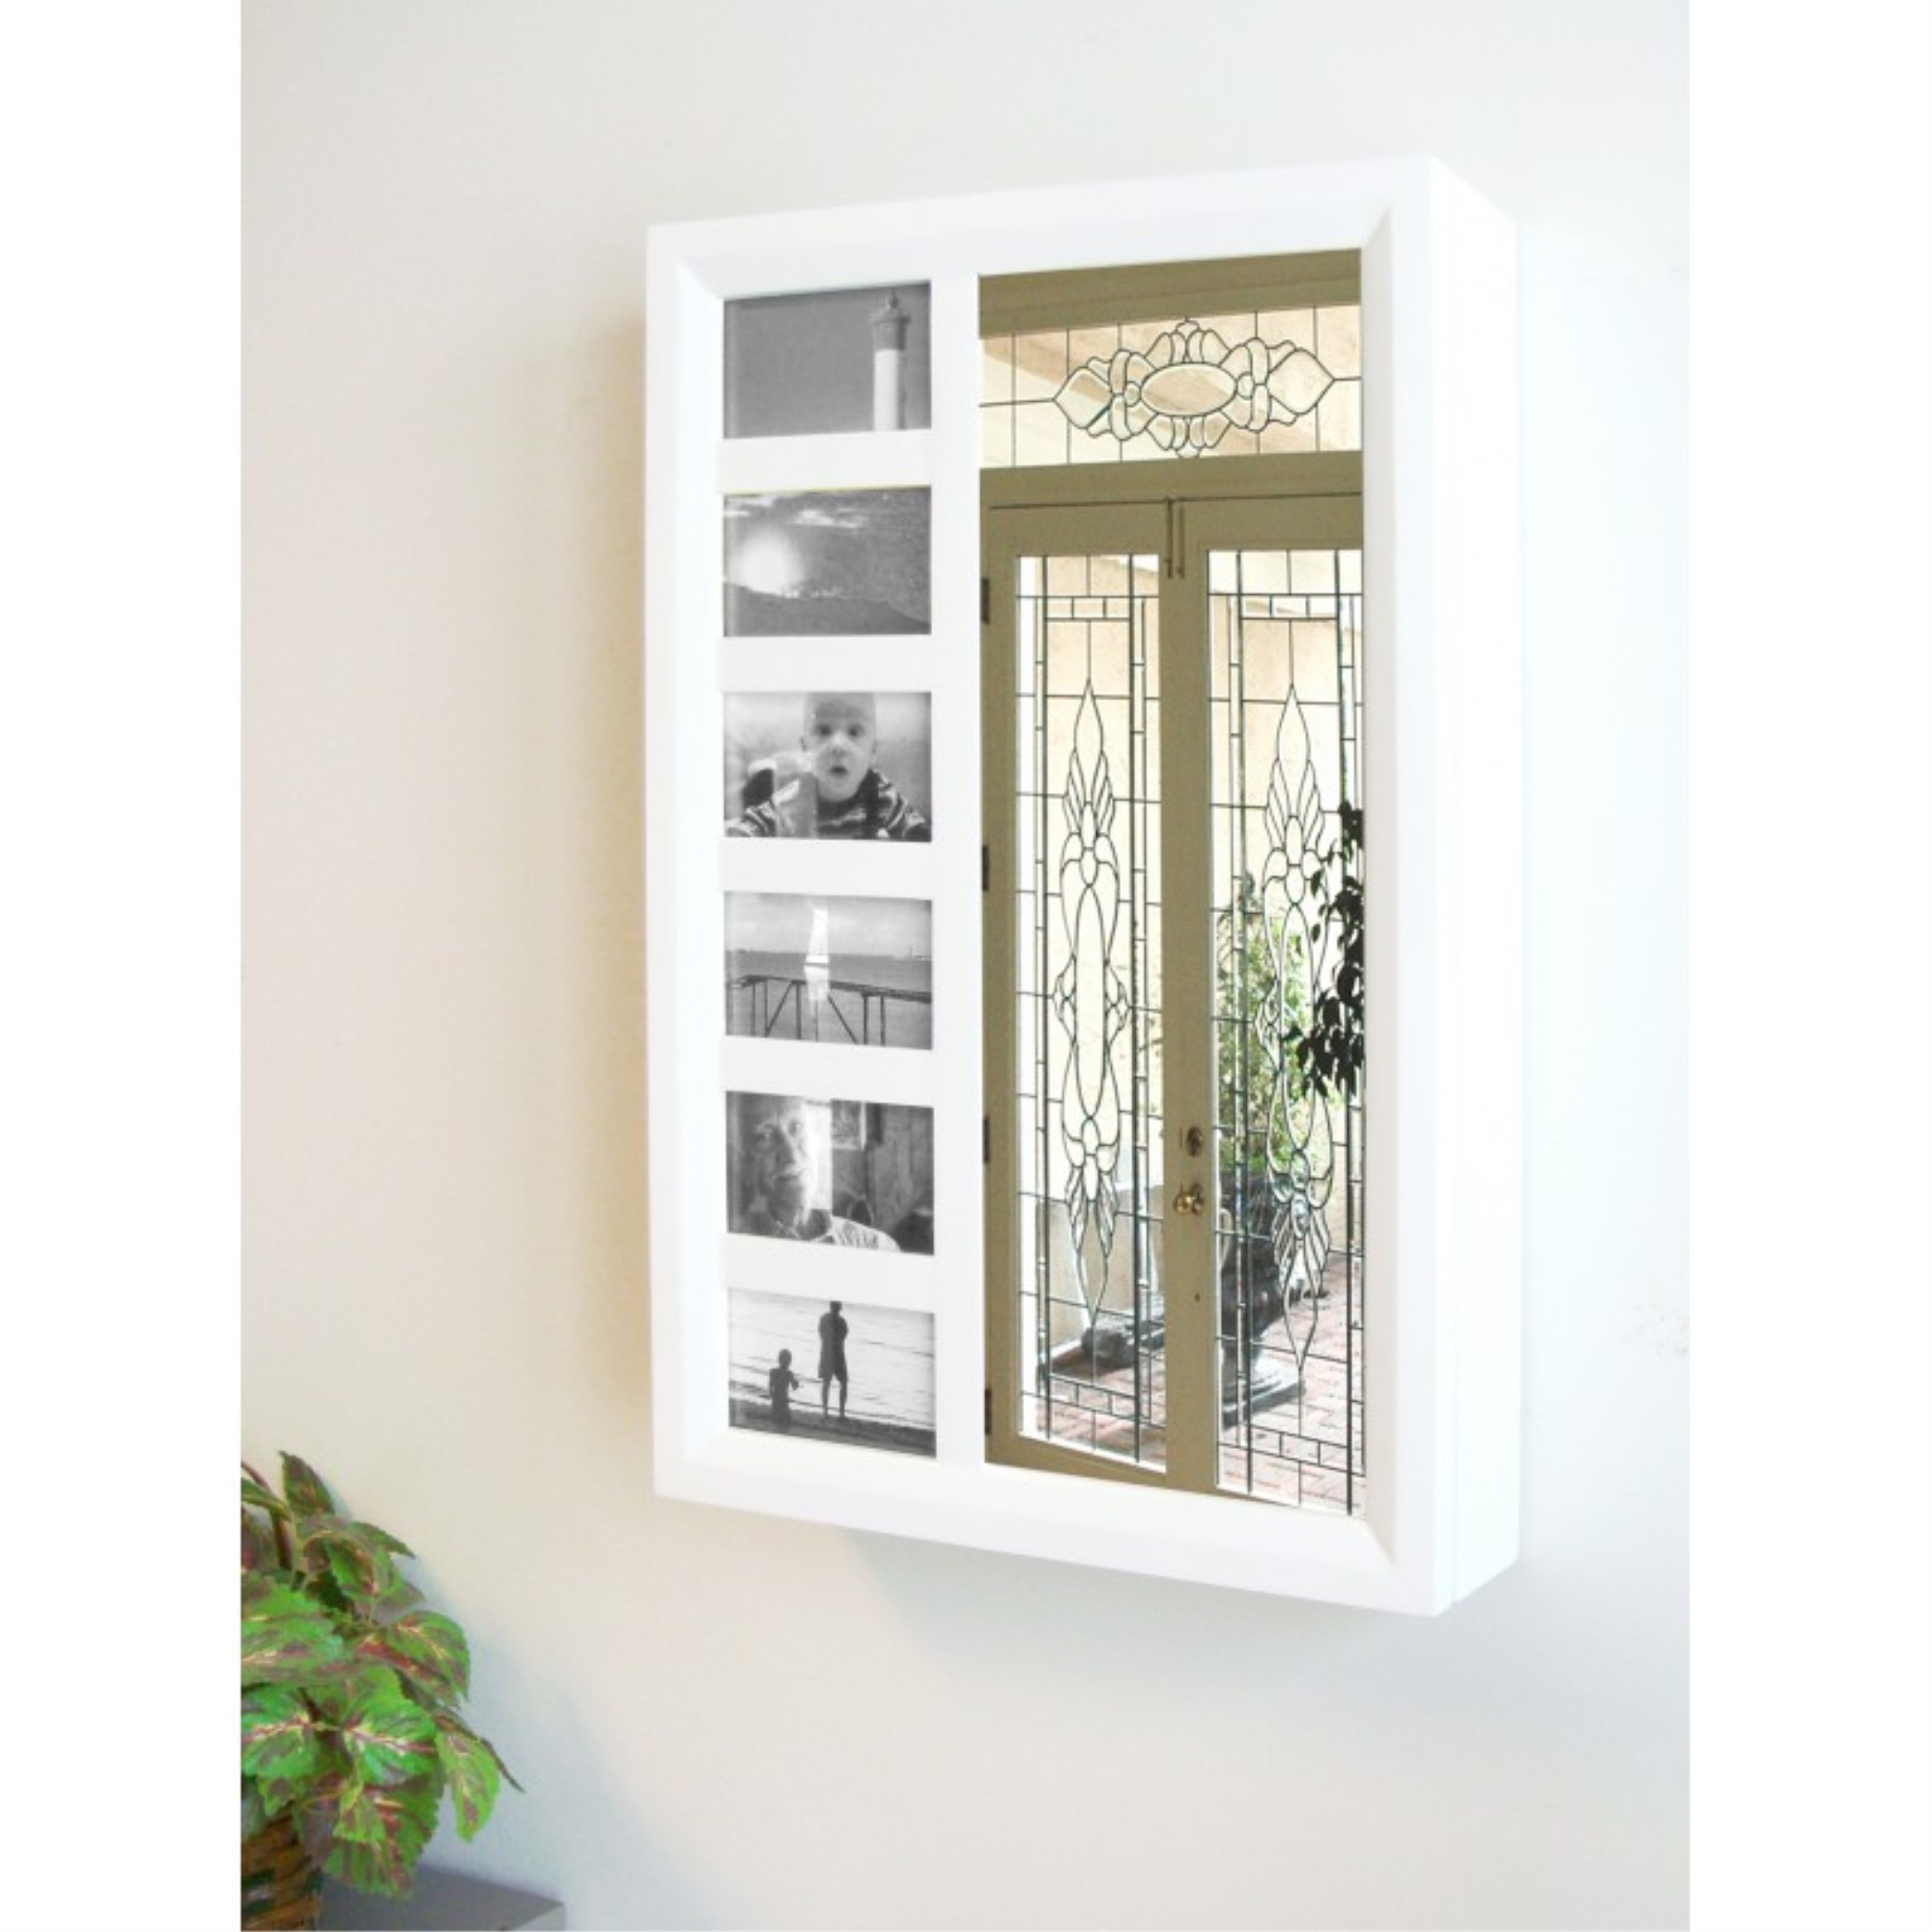 Proman Products Bellissimo Venice Wall Mount Jewelry Armoire in White